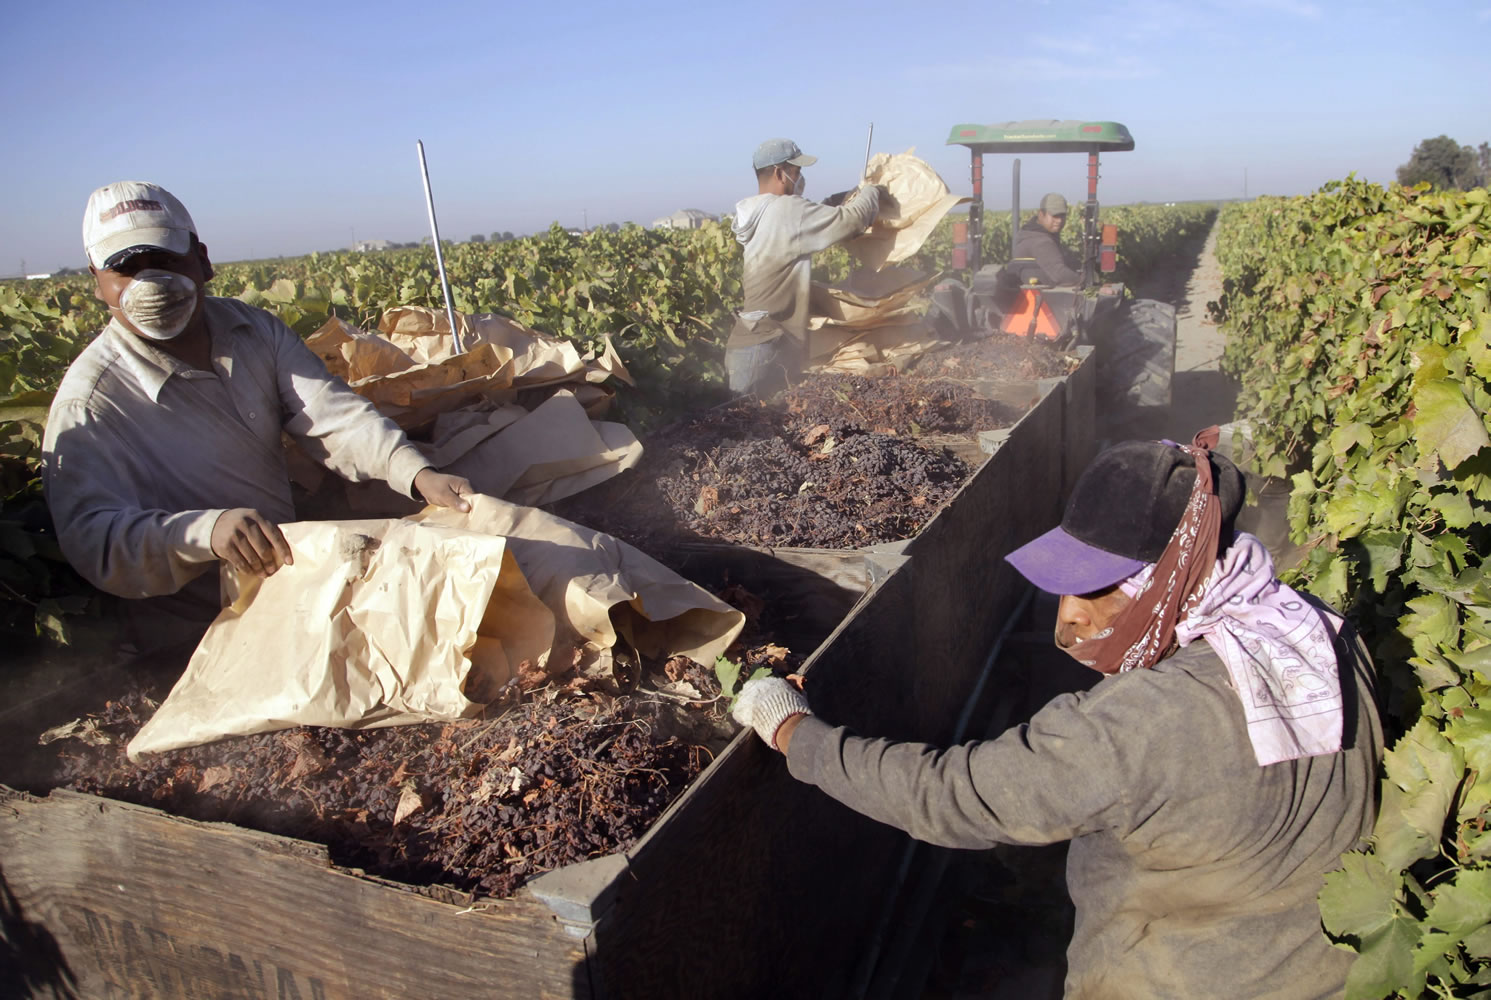 Farmworkers pick paper trays of dried raisins off the ground and heap them onto a trailer in the final step of raisin harvest near Fresno, Calif. Thousands of farmworkers in California, the nation?s leading grower of fruits, vegetables and nuts may soon be able to leave the uncertainty of their seasonal jobs for steady, year-around work building homes, cooking in restaurants and cleaning hotel rooms. An estimated 5 million people in the country illegally could be eligible to stay under the executive action President Barack Obama announced in November.